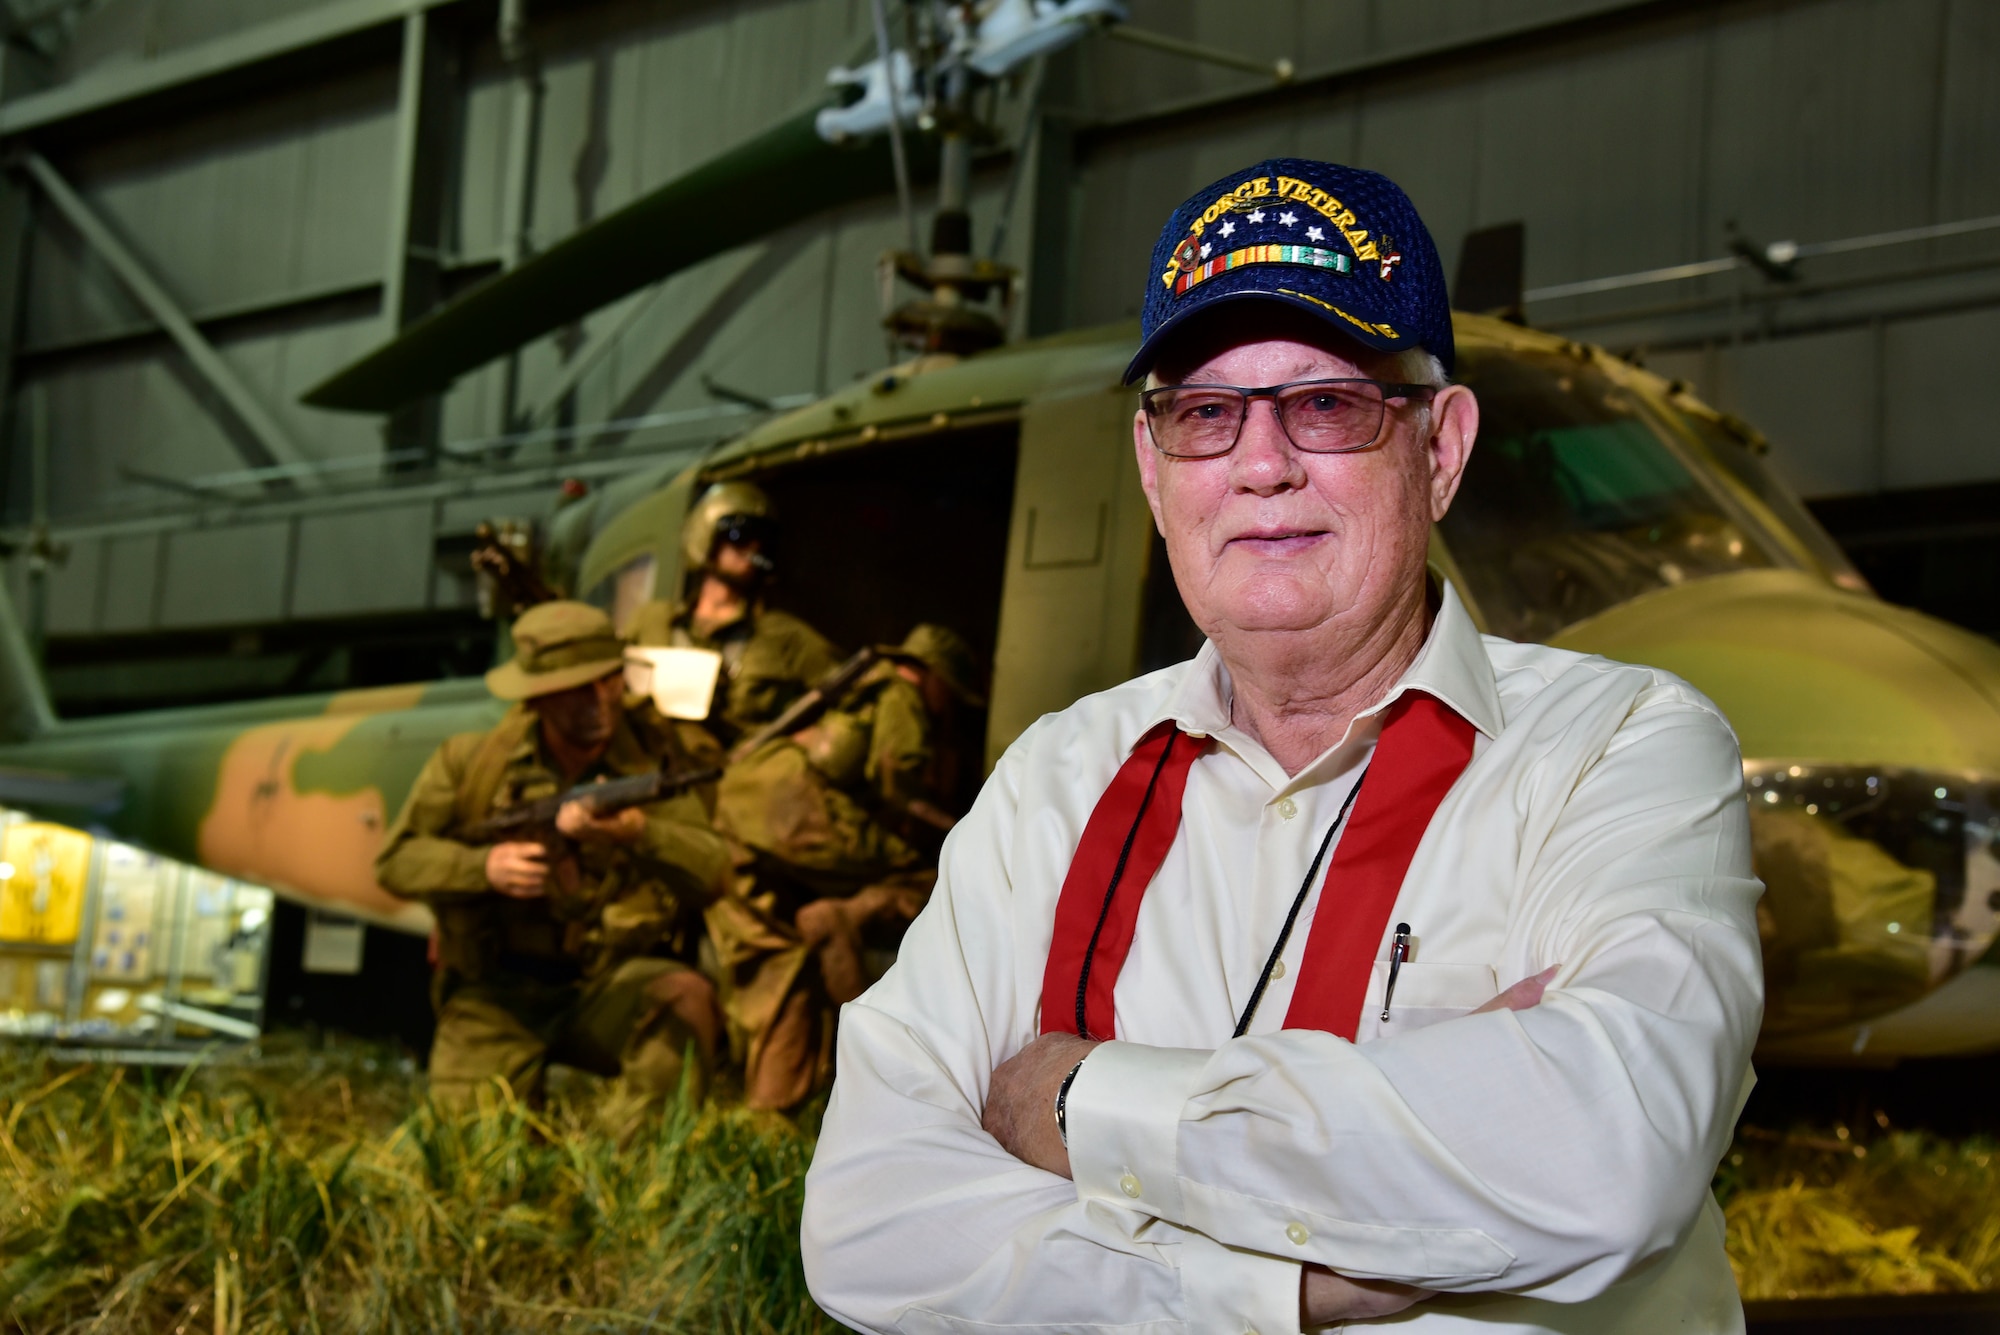 DAYTON, Ohio -- MSgt. (Ret.) Fred Cook stands in front of the Secret War diorama in the Southeast Asia War Gallery at the National Museum of the U.S. Air Force on Sept. 15, 2016. Cook served his second tour in Southeast Asia with the 20th SOS "Green Hornets" at Nha Trang and Ban Me Thout, Vietnam. He was the right door gunner on the 26 Nov 1968 mission that is depicted in the National Museum of the U.S. Air Force�s UH-1P, 20th SOS �Green Hornets,� legacy diorama display. He was awarded the Distinguished Flying Cross for Valor for his part in this mission.(U.S. Air Force photo by Ken LaRock)